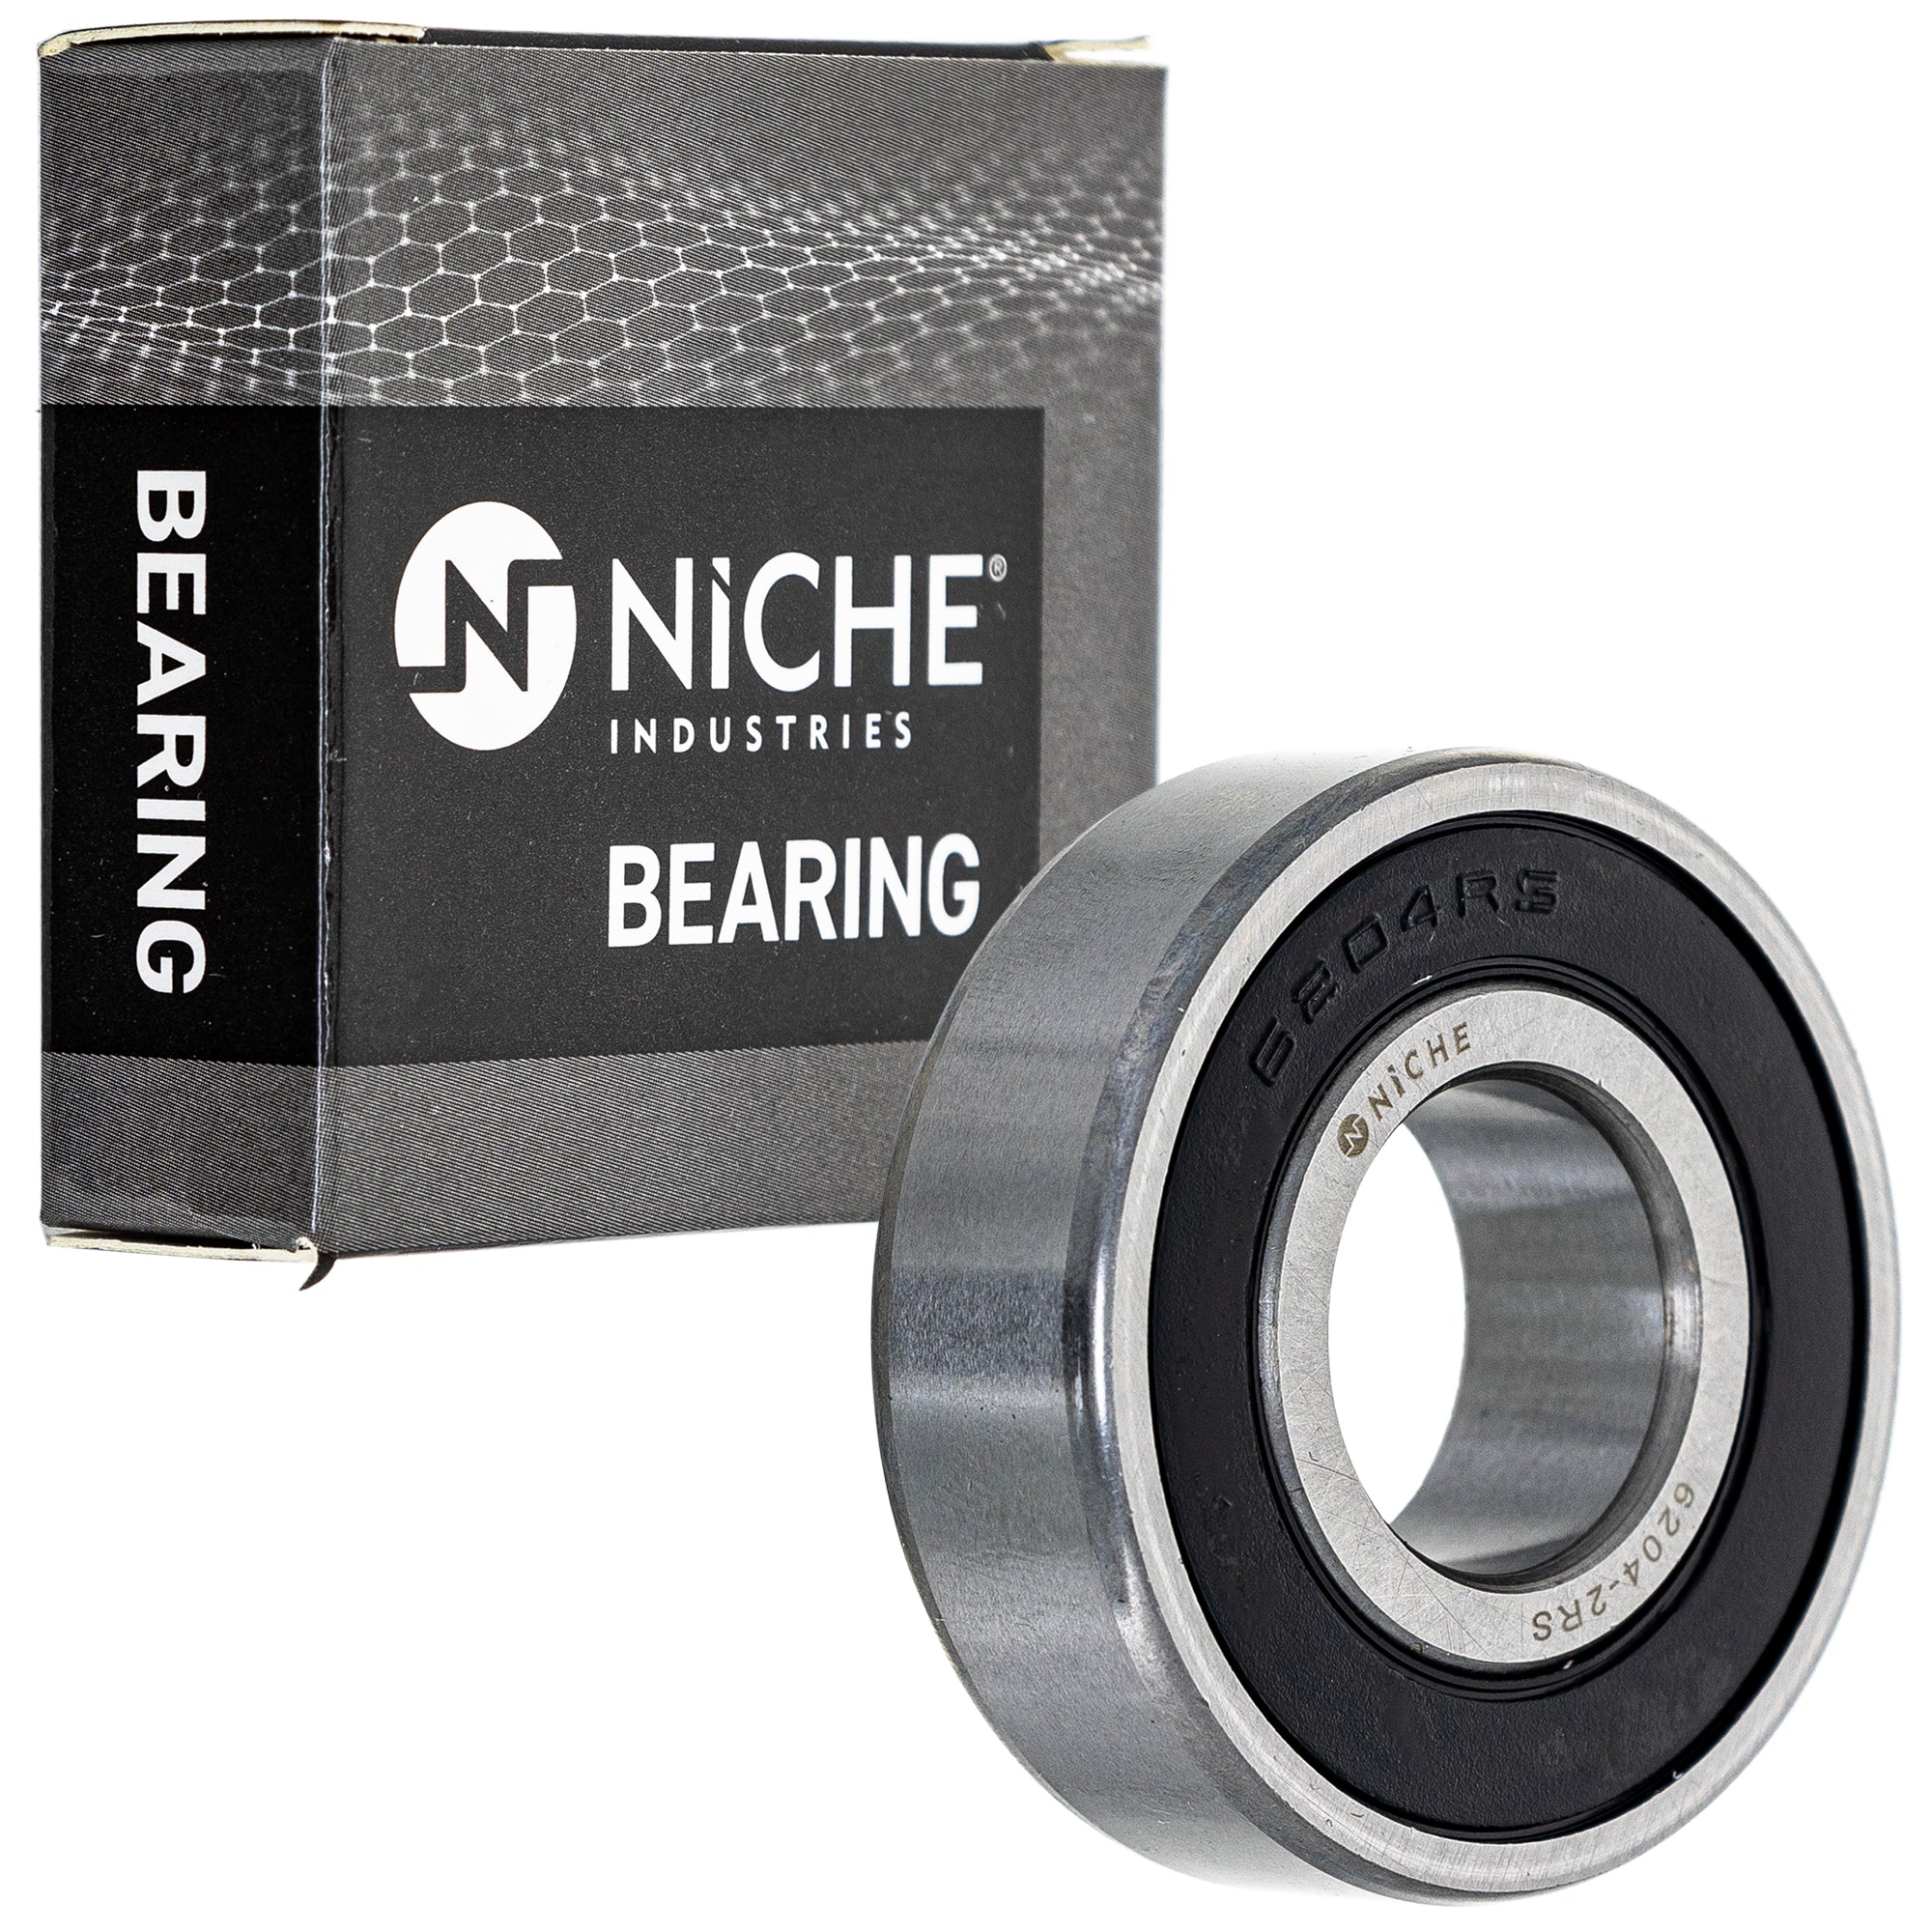 NICHE 519-CBB2229R Bearing 2-Pack for zOTHER Snapper MURRAY Murray